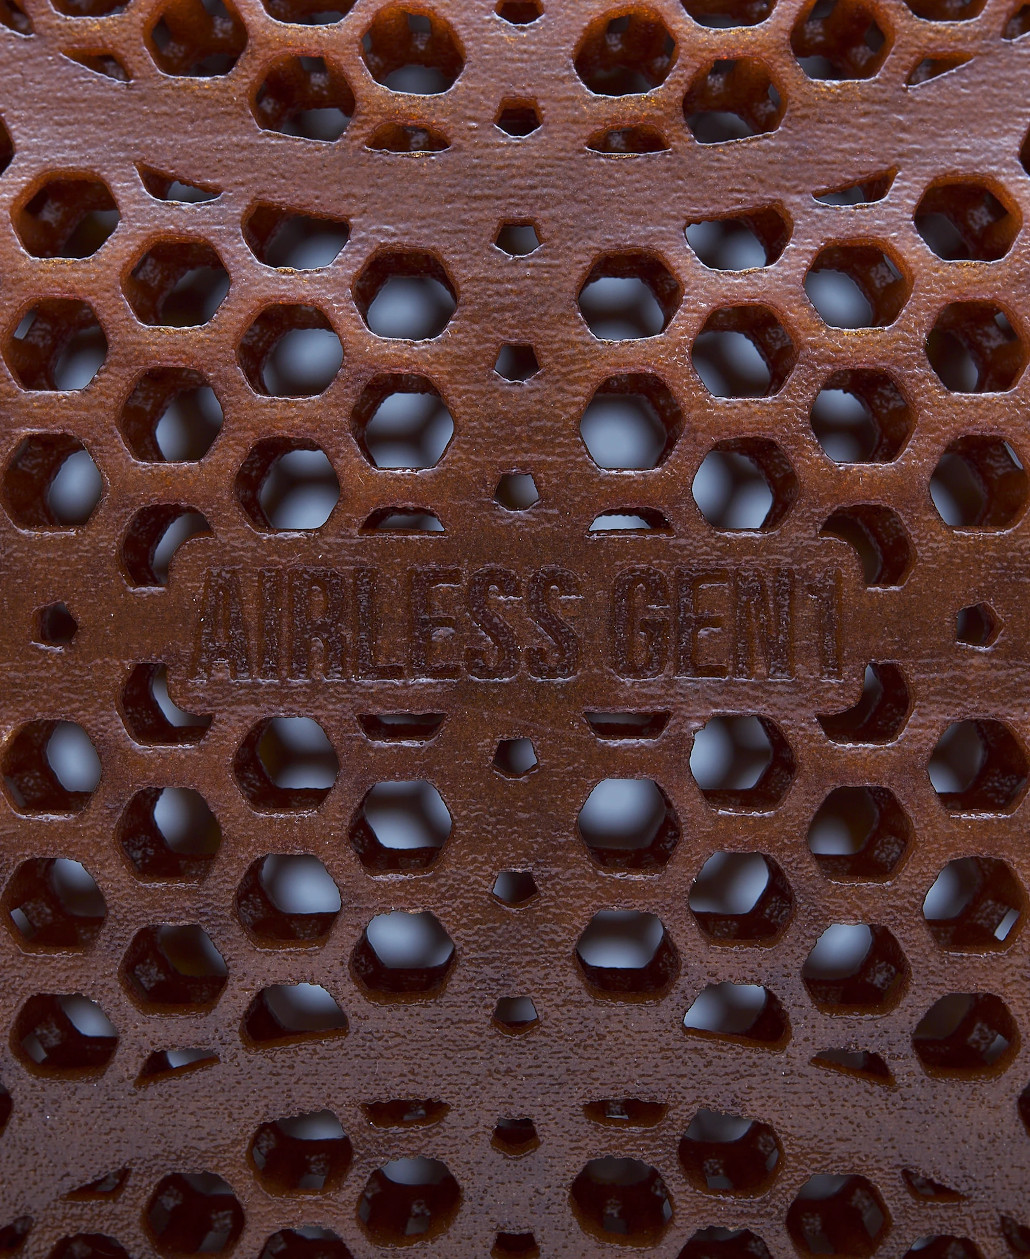 a close up of the honeycomb pattern of the basketball